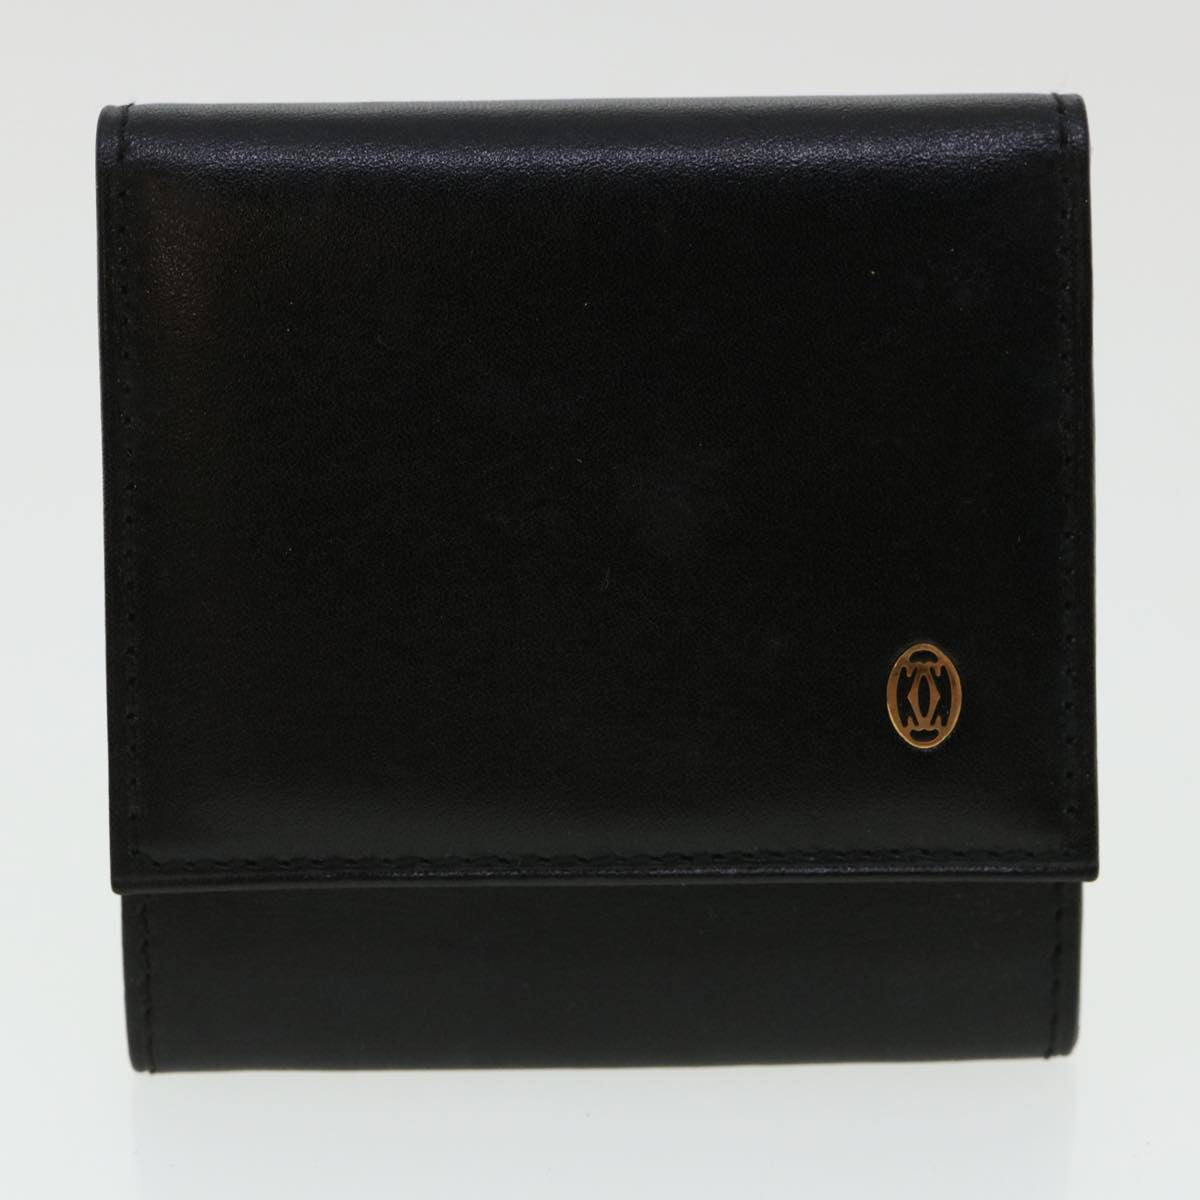 CARTIER Coin Purse Leather 2Set Black Brown Auth 33137 - 0